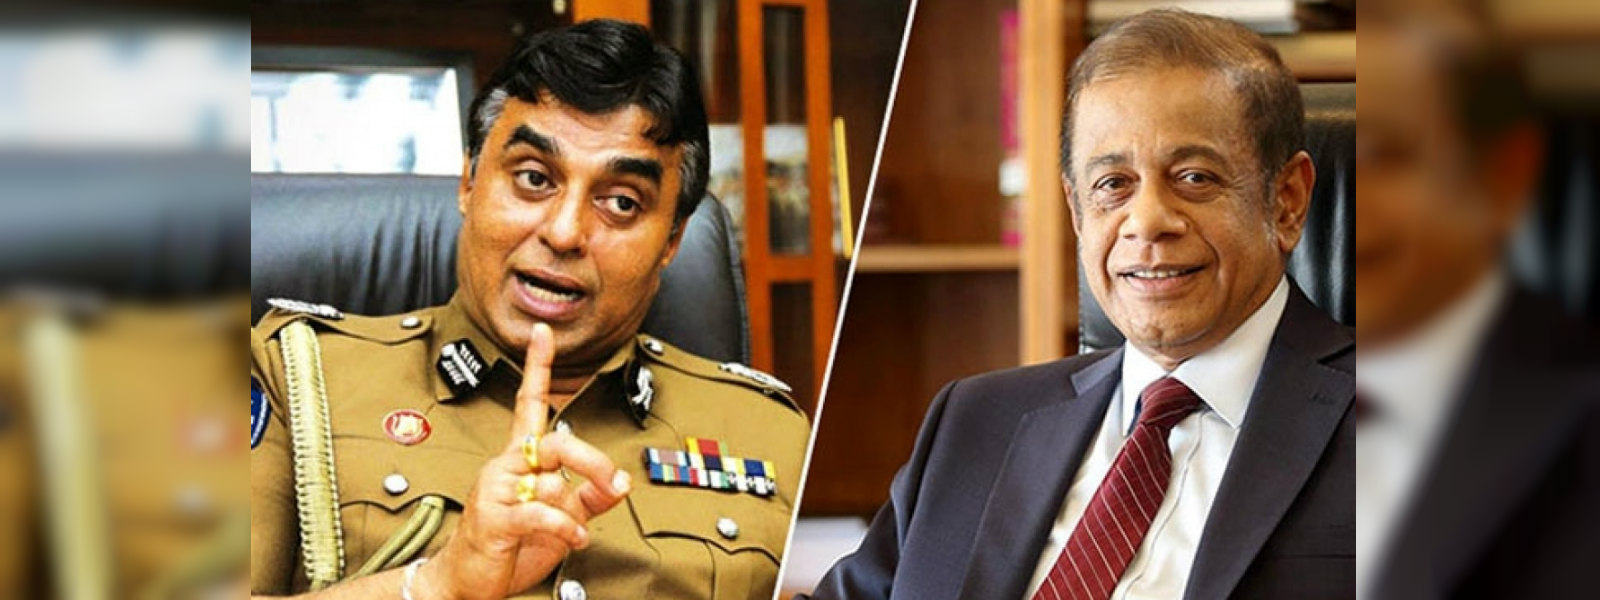 04/21 Parliamentary Select Committee summons IGP and former Defence Secretary on June 6